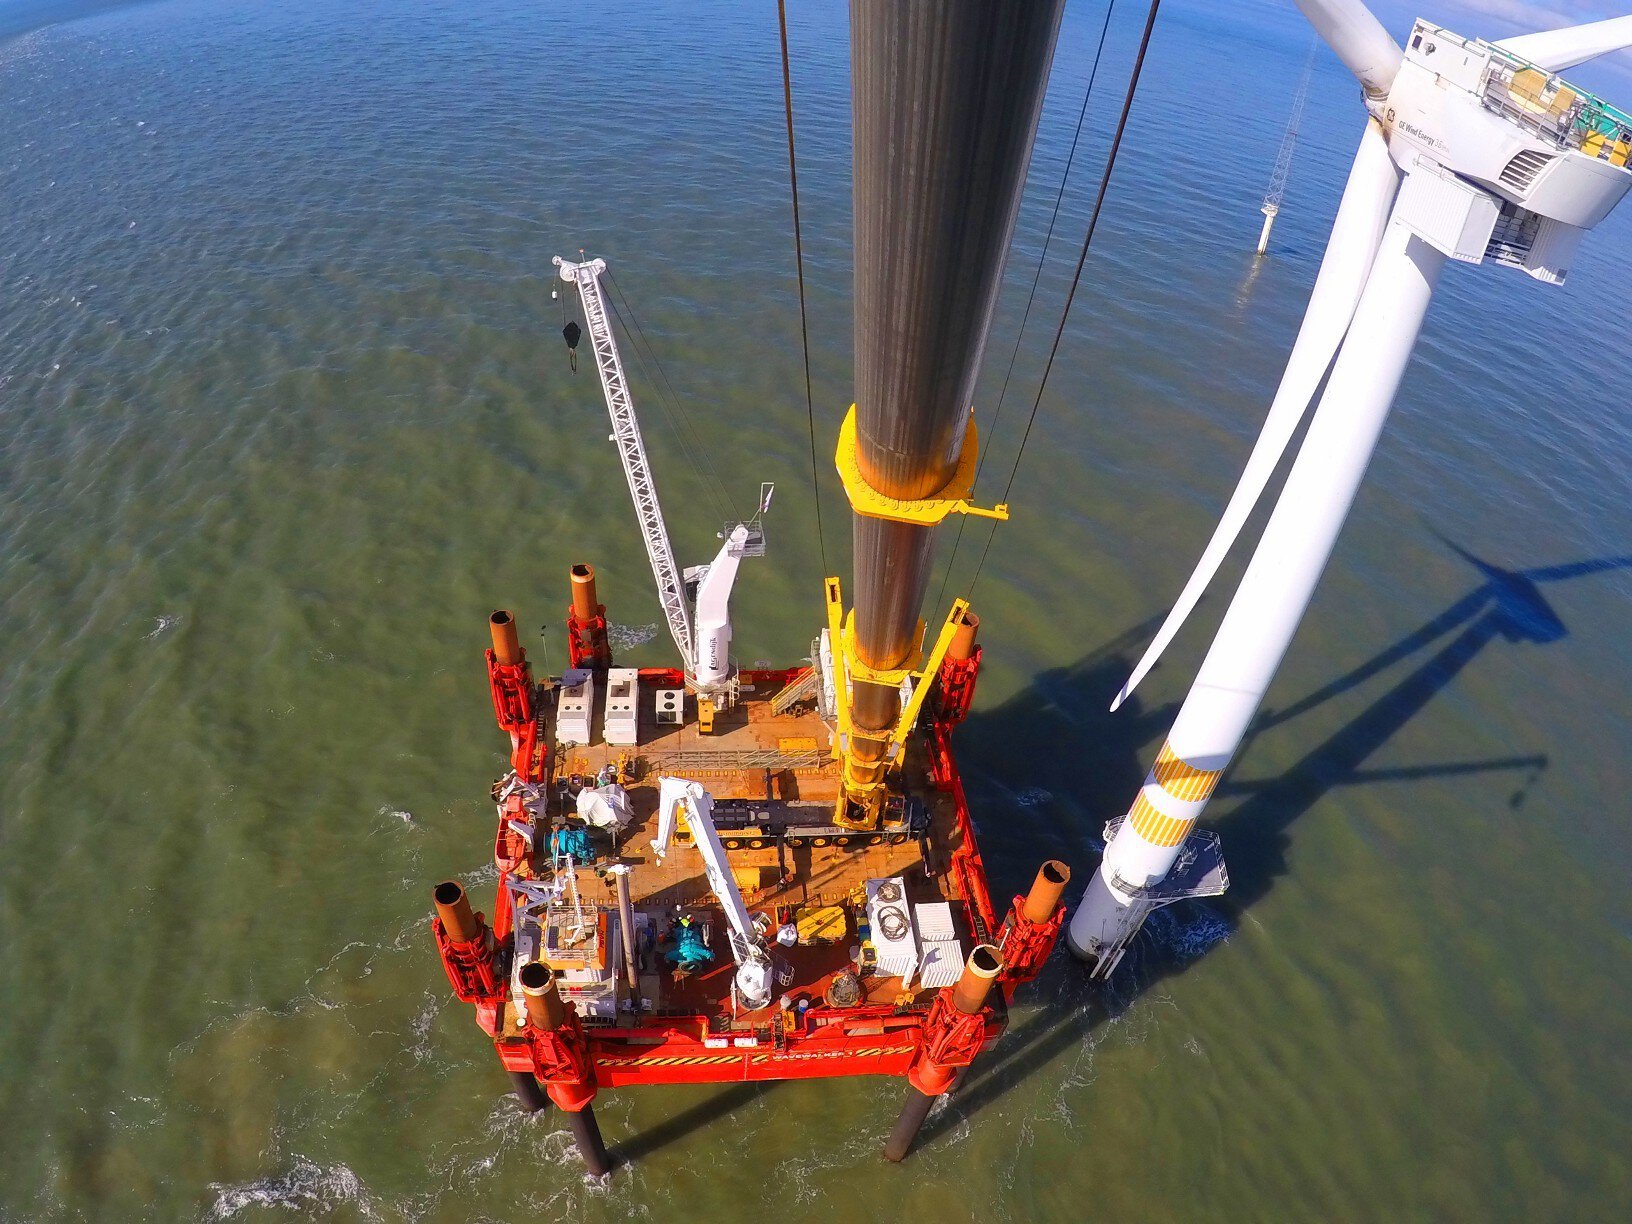 Undertaking a "Gear Box Replacement - Arklow Bank Offshore Wind Farm, Ireland".
DCIM\102GOPRO\G0113158.